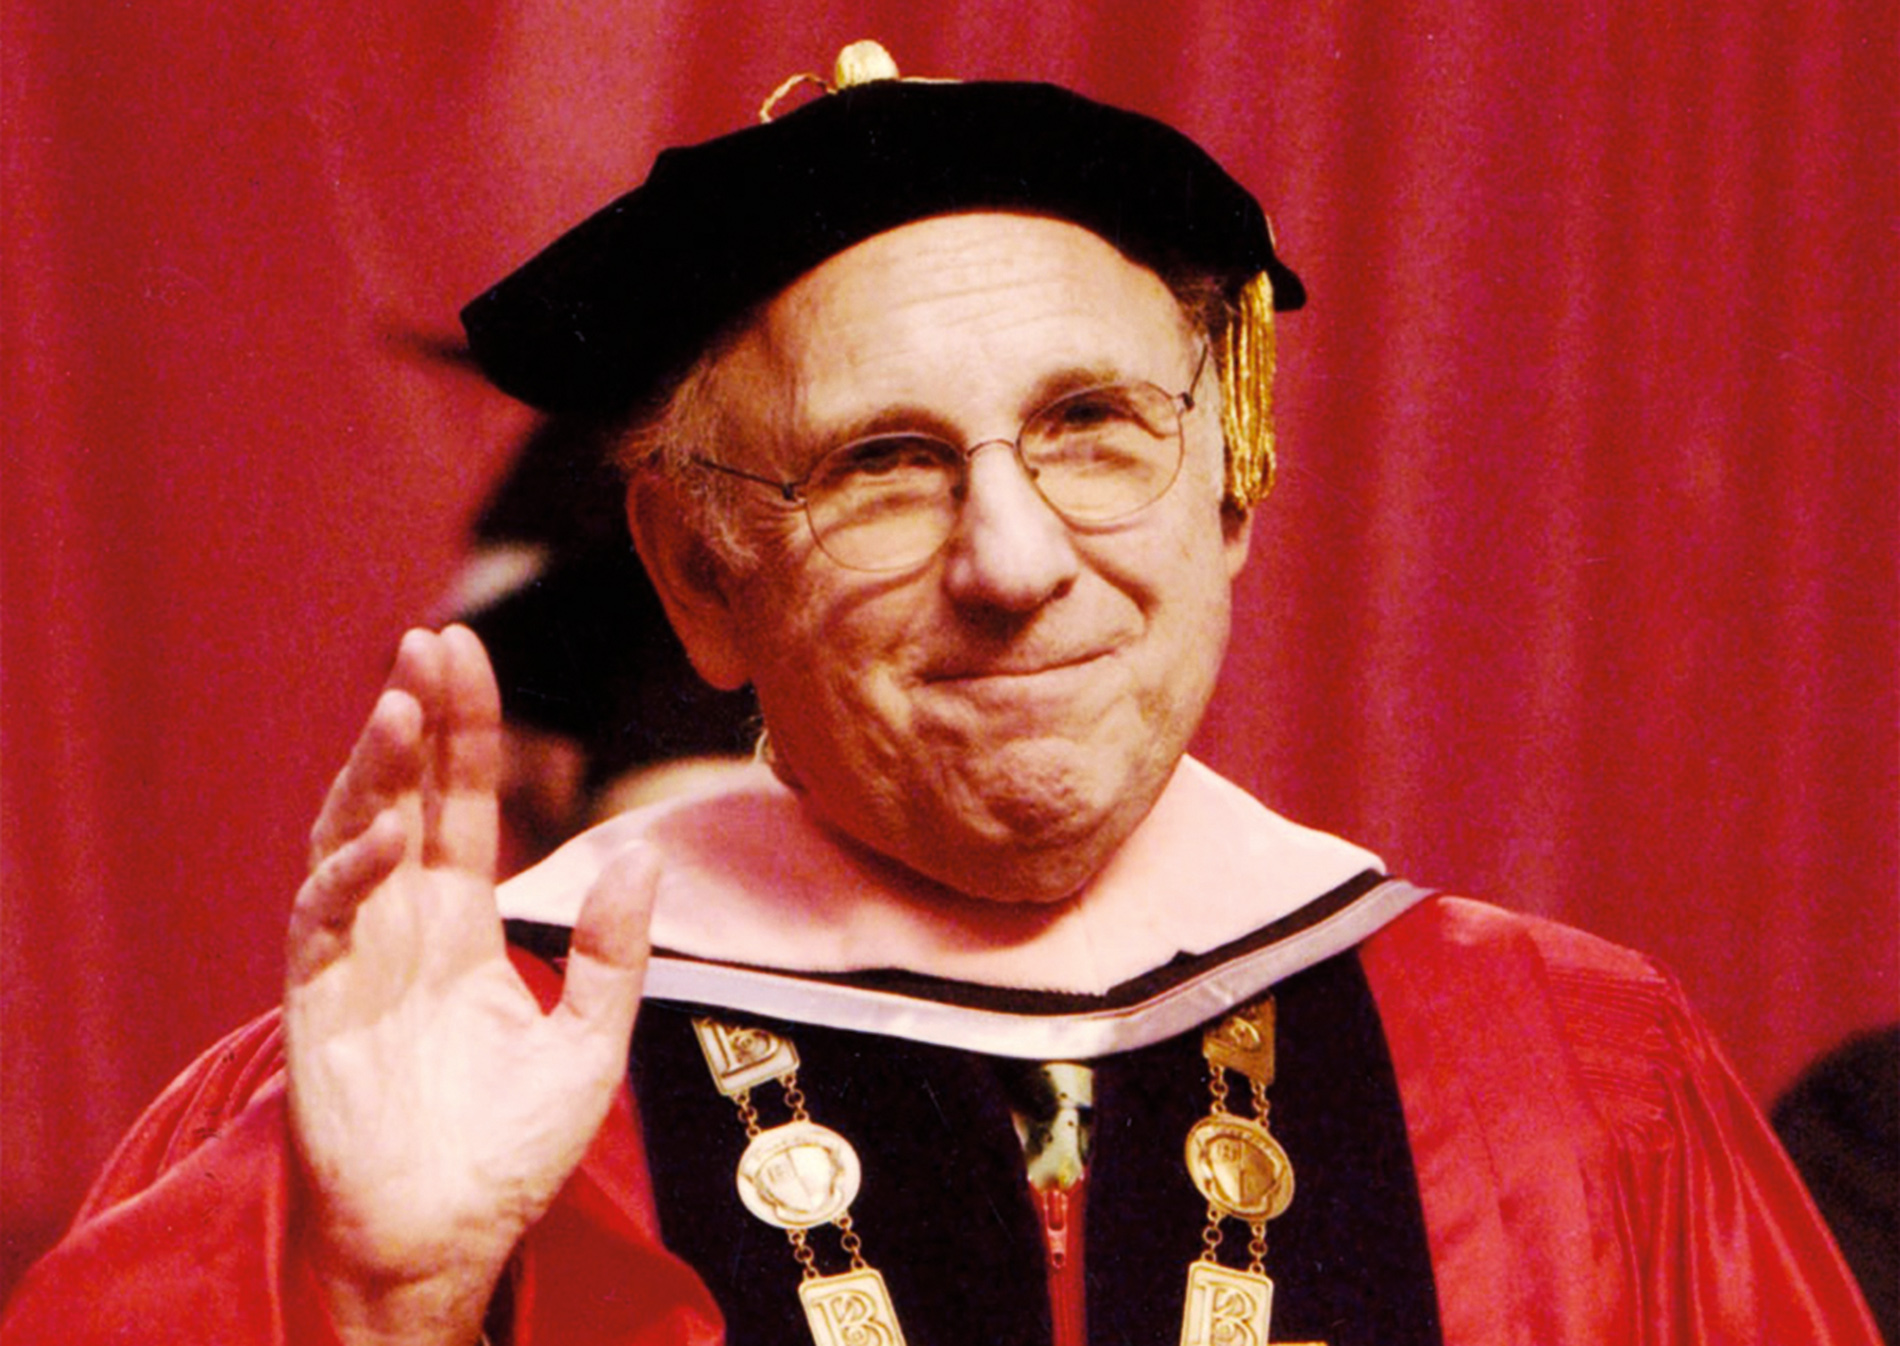 Image of Lee Berk in a cap and gown